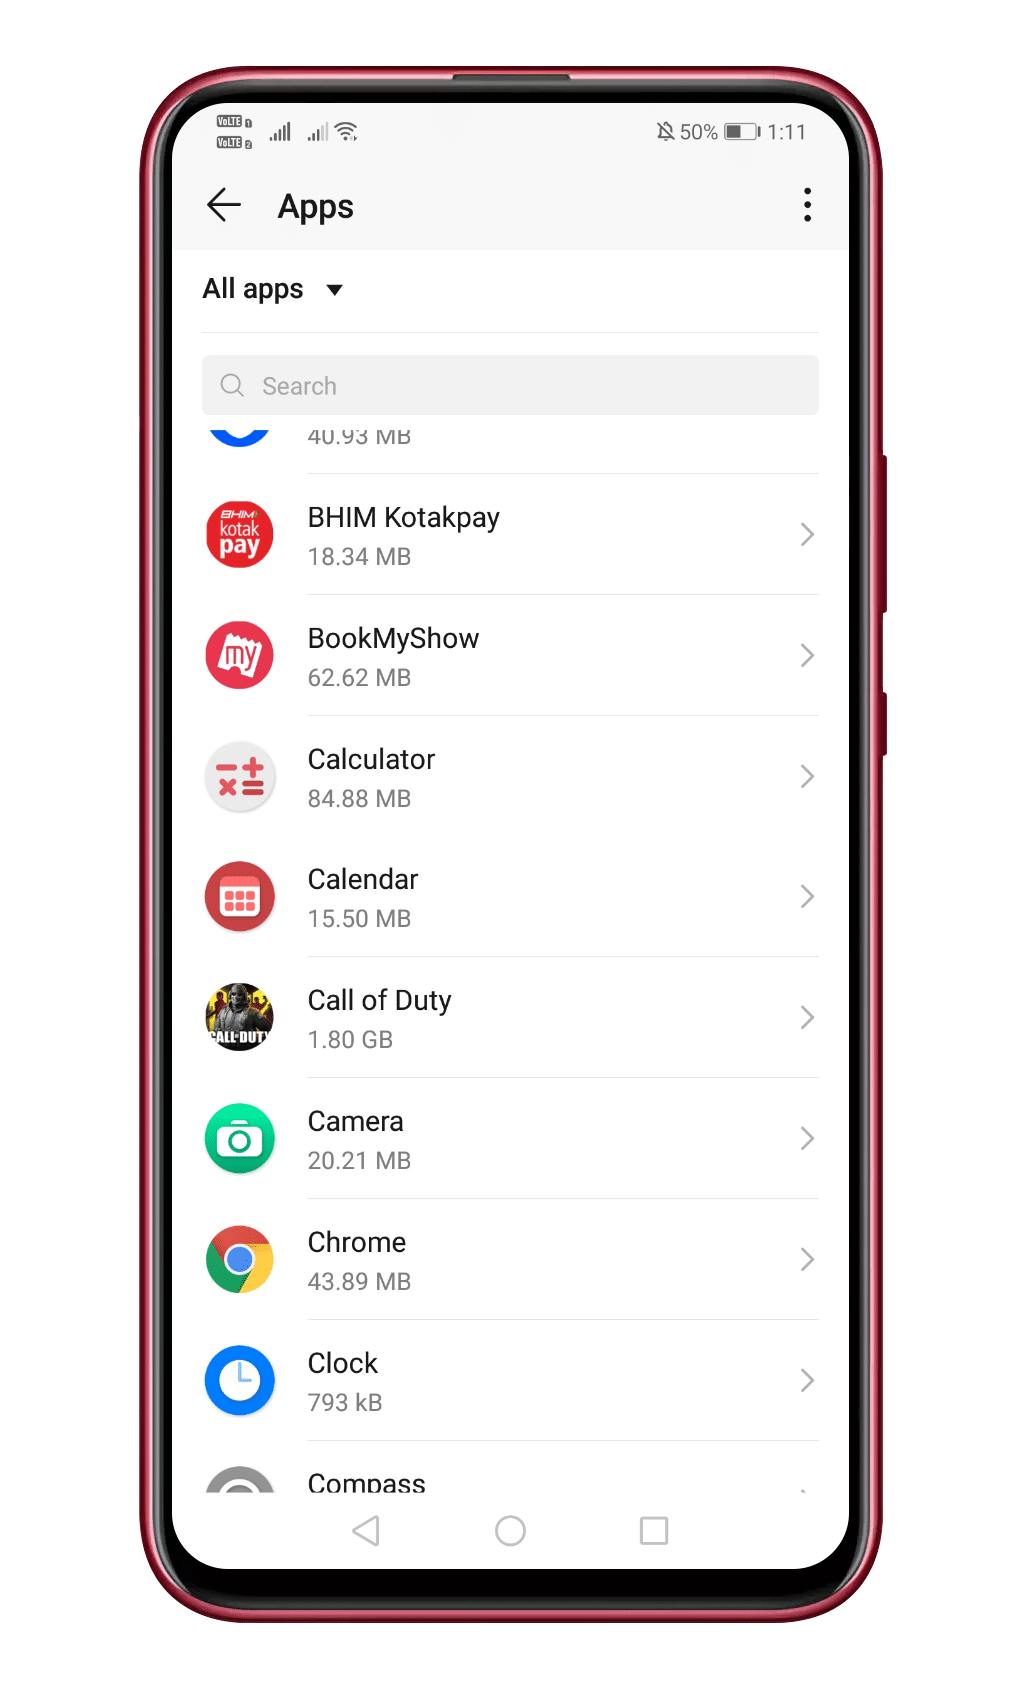 Head to the Settings > Apps